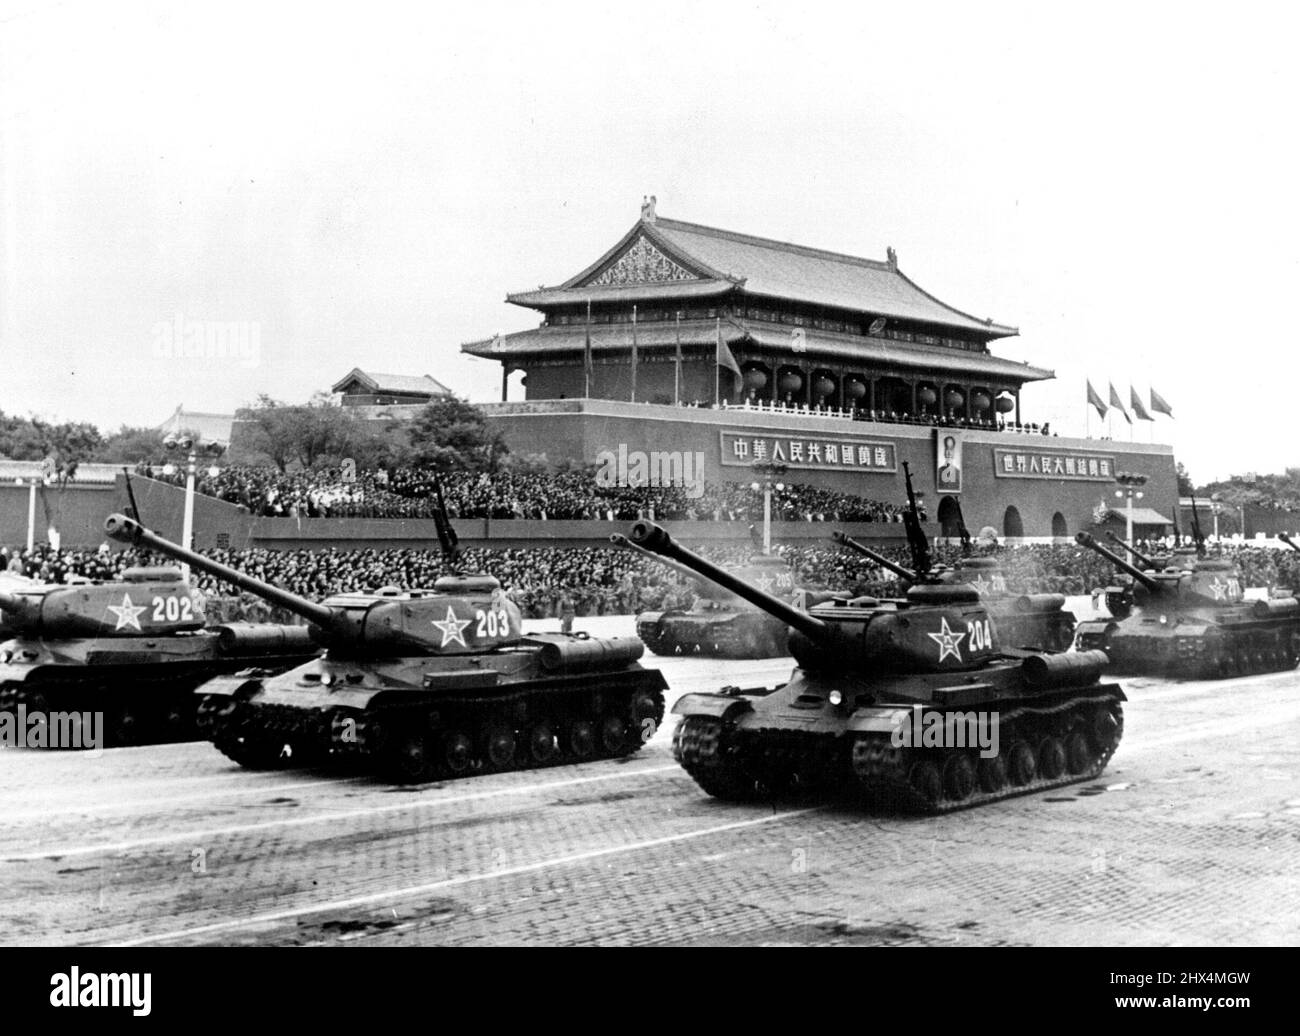 The Two Faces of Communist China: Tanks Parade -- On 1st October, 1954, the Fifth anniversary of the establishment of Communist China, a mammoth parade was held in Tien an men Square in Peking where Mao Tse-tung took the salute. The display was composed of illustrations of war and peace. - Our photographs shows tanks of the Communist army rumbling across the Tien an Men Square in formation. October 21, 1954. (Photo by Camera Press). Stock Photo